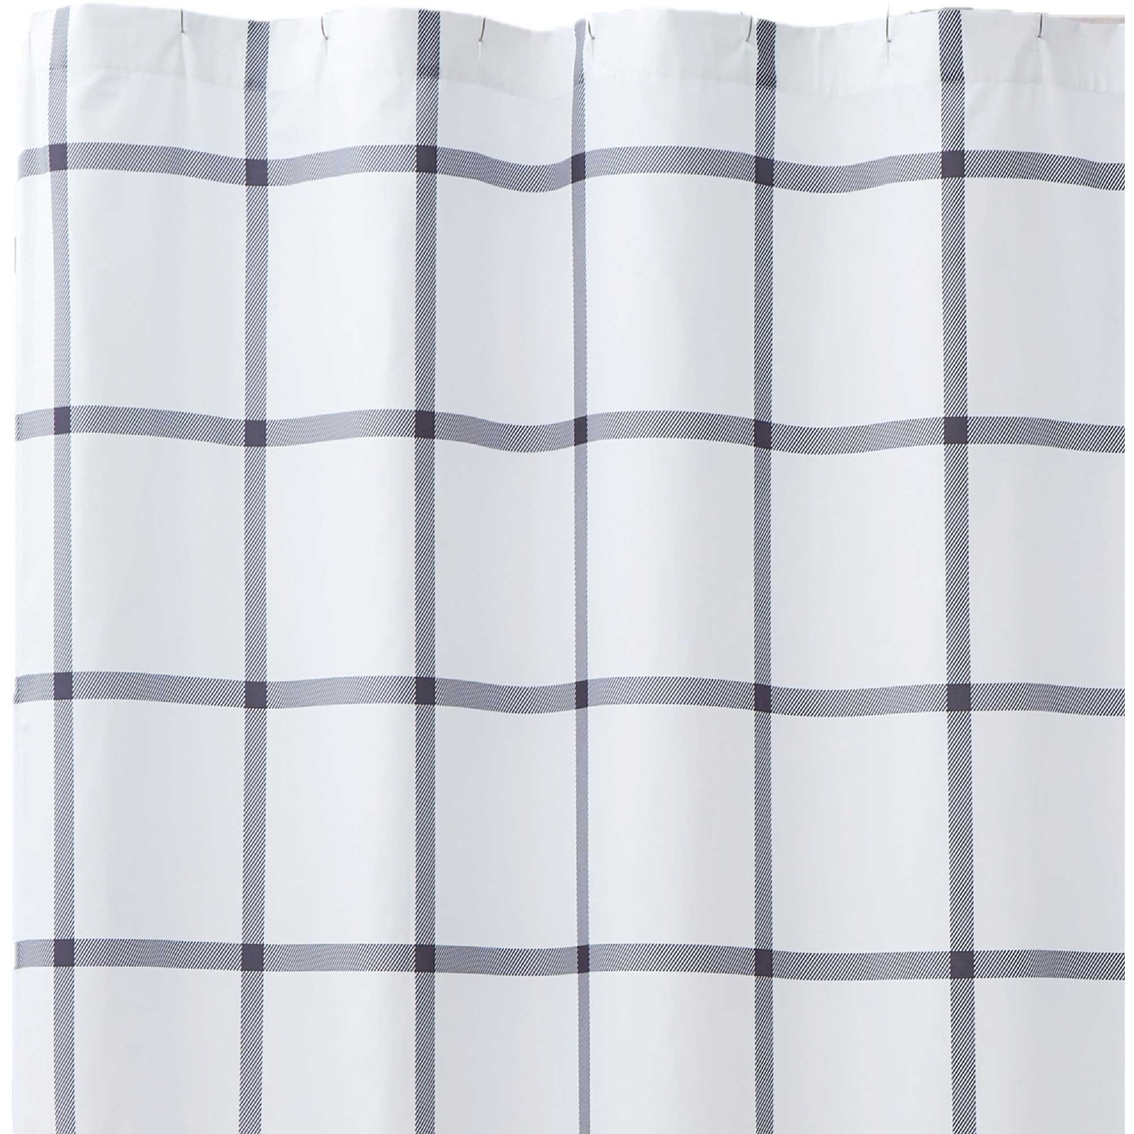 Truly Soft Printed Windowpane  72 x 72 in. Shower Curtain - Image 3 of 3